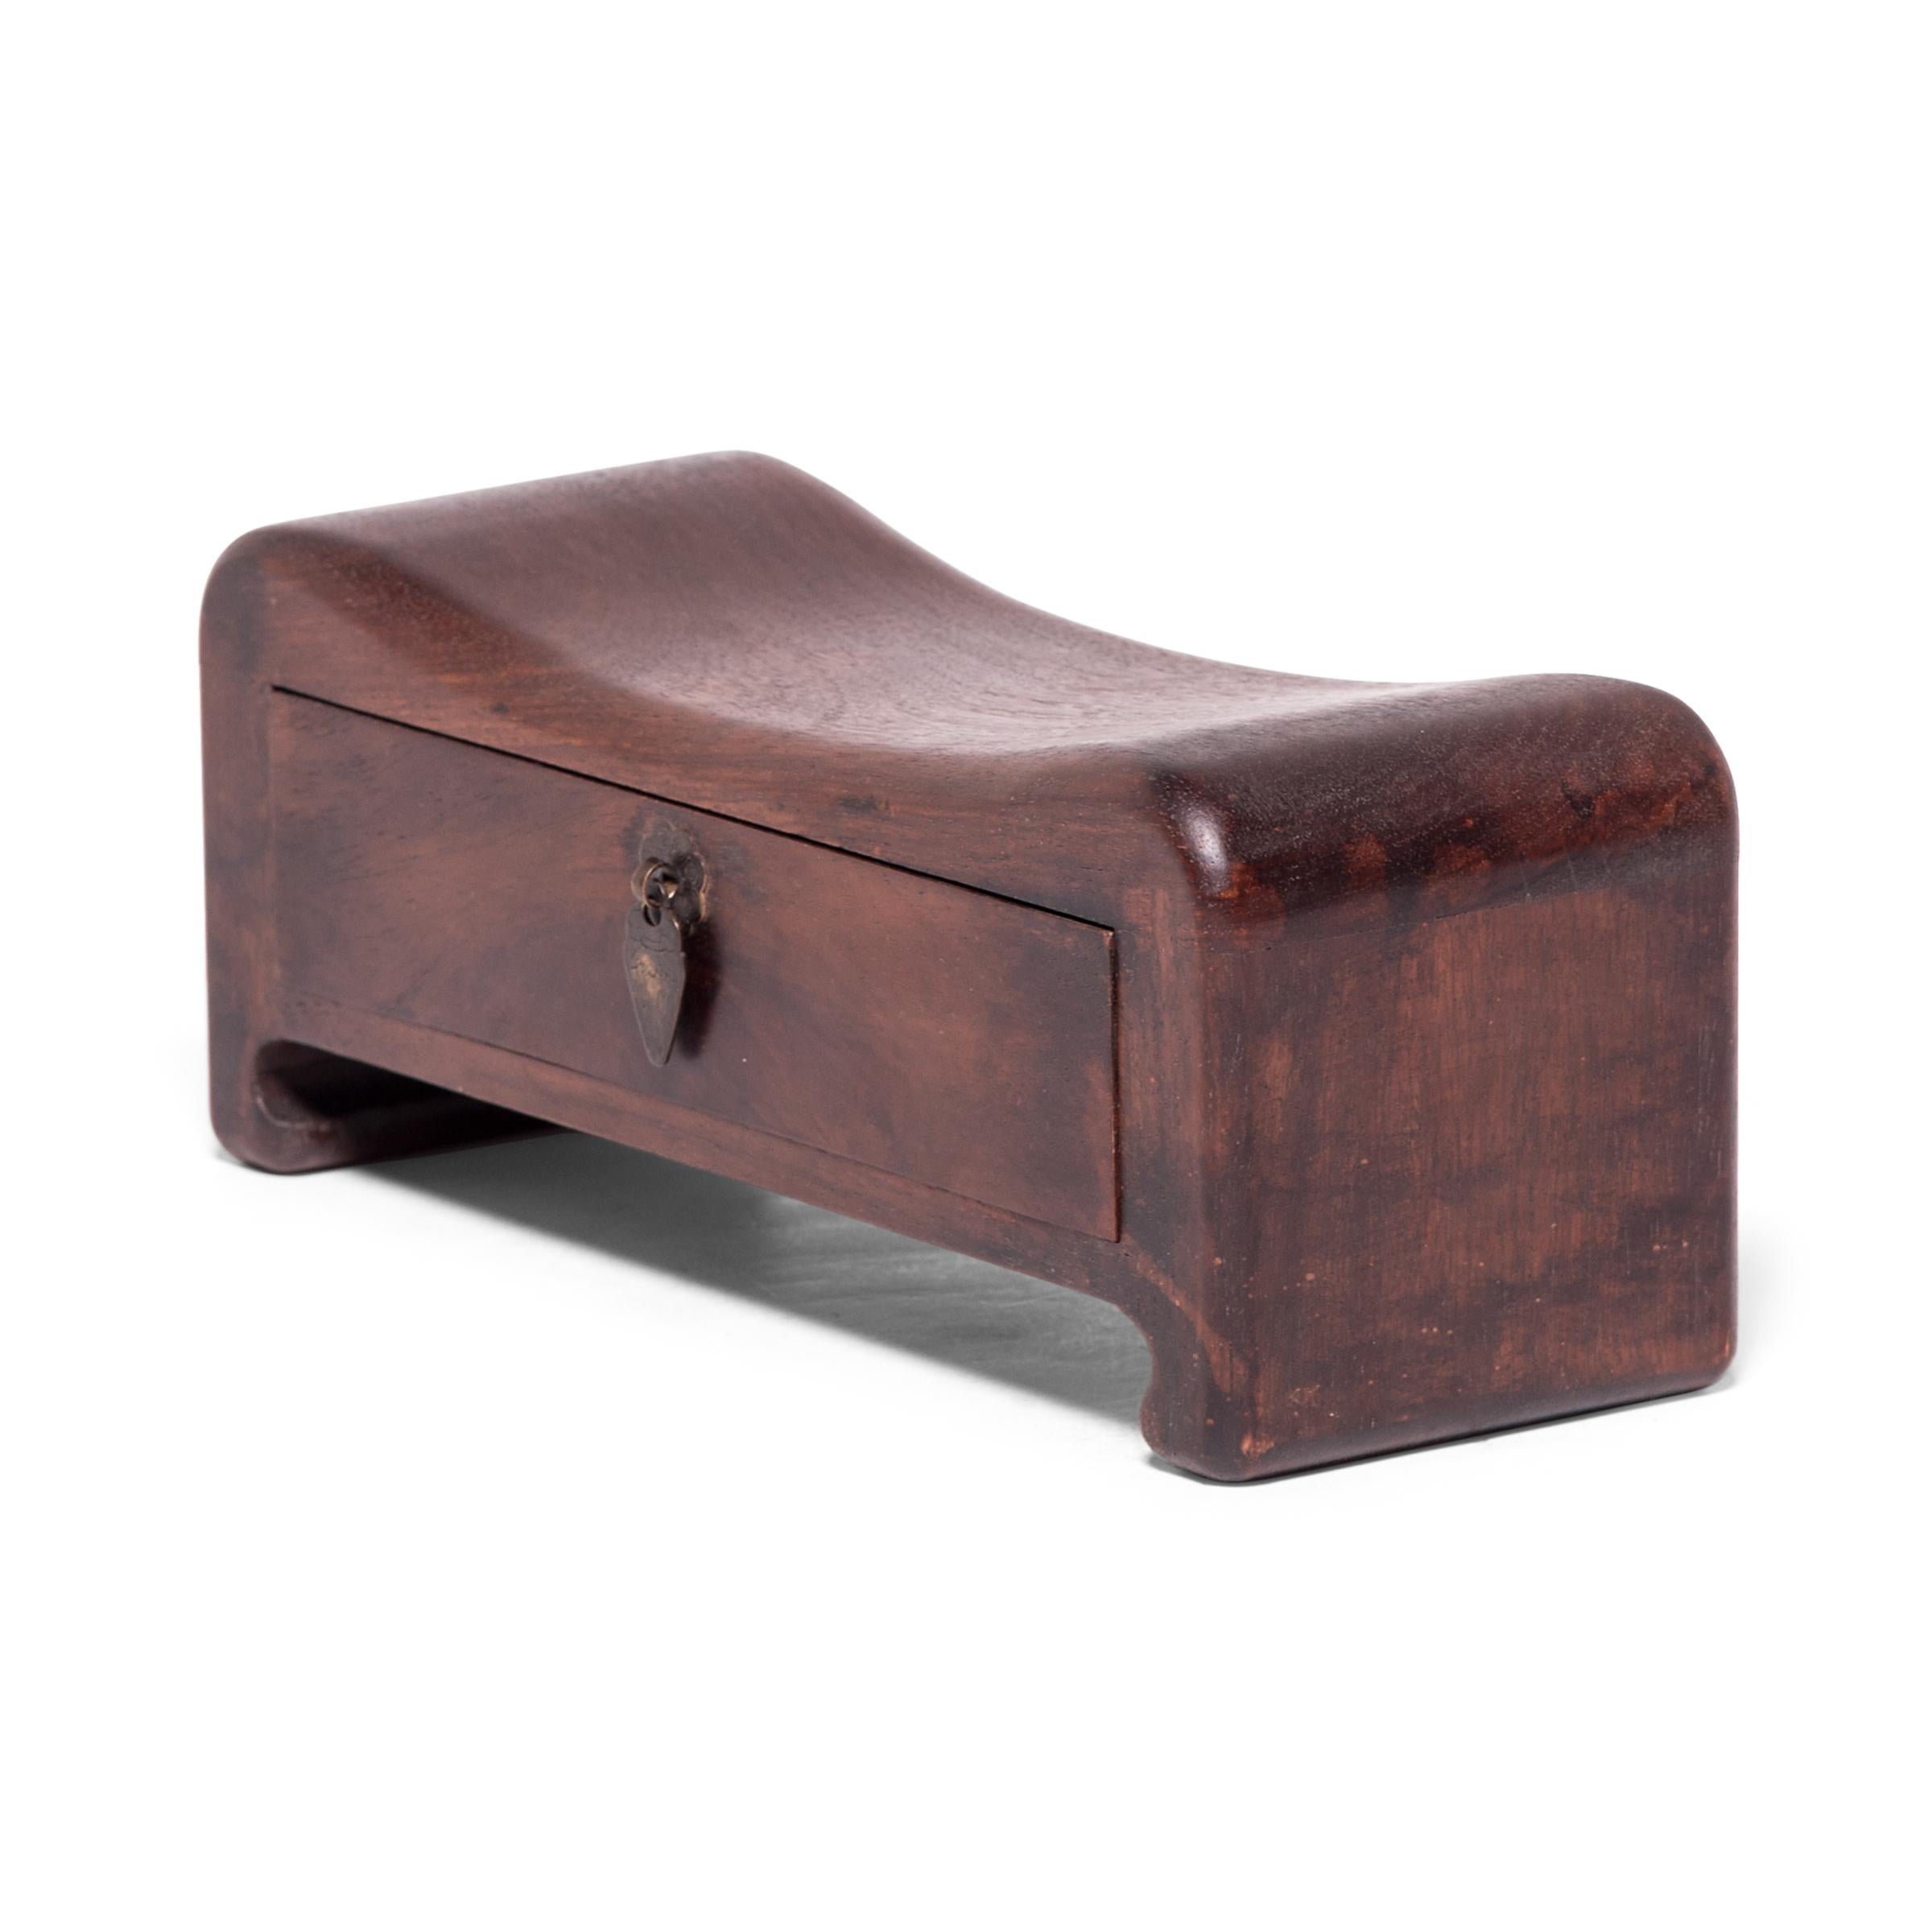 Crafted of a fine hardwood, this early 20th century footed headrest was once used by an upper-class woman in lieu of a pillow. Gently curving to support her head and neck at rest, the headrest also helped to preserve her intricate hairstyle. This